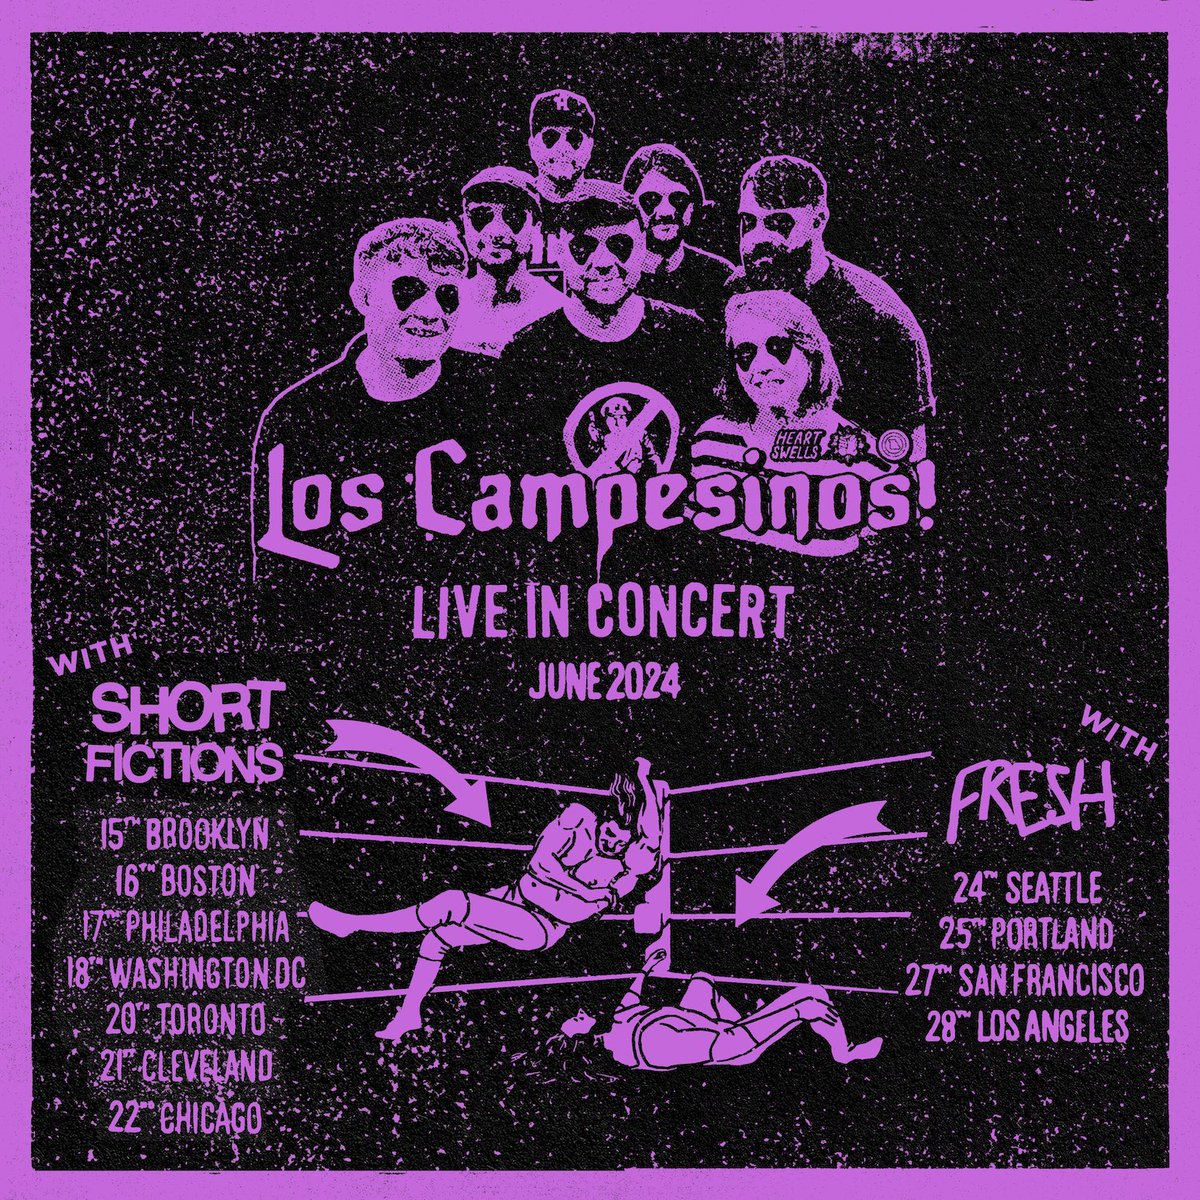 Counting the days until these shows with @short_fictions and @freshpunks! By the time these roll around, you’ll have new LC! music… DC 9️⃣7️⃣% sold Toronto 9️⃣4️⃣% sold San Fran 9️⃣7️⃣% sold 🚫 Brooklyn, Chicago, Seattle SOLD OUT ￼🎟️ linktr.ee/LosCampesinos